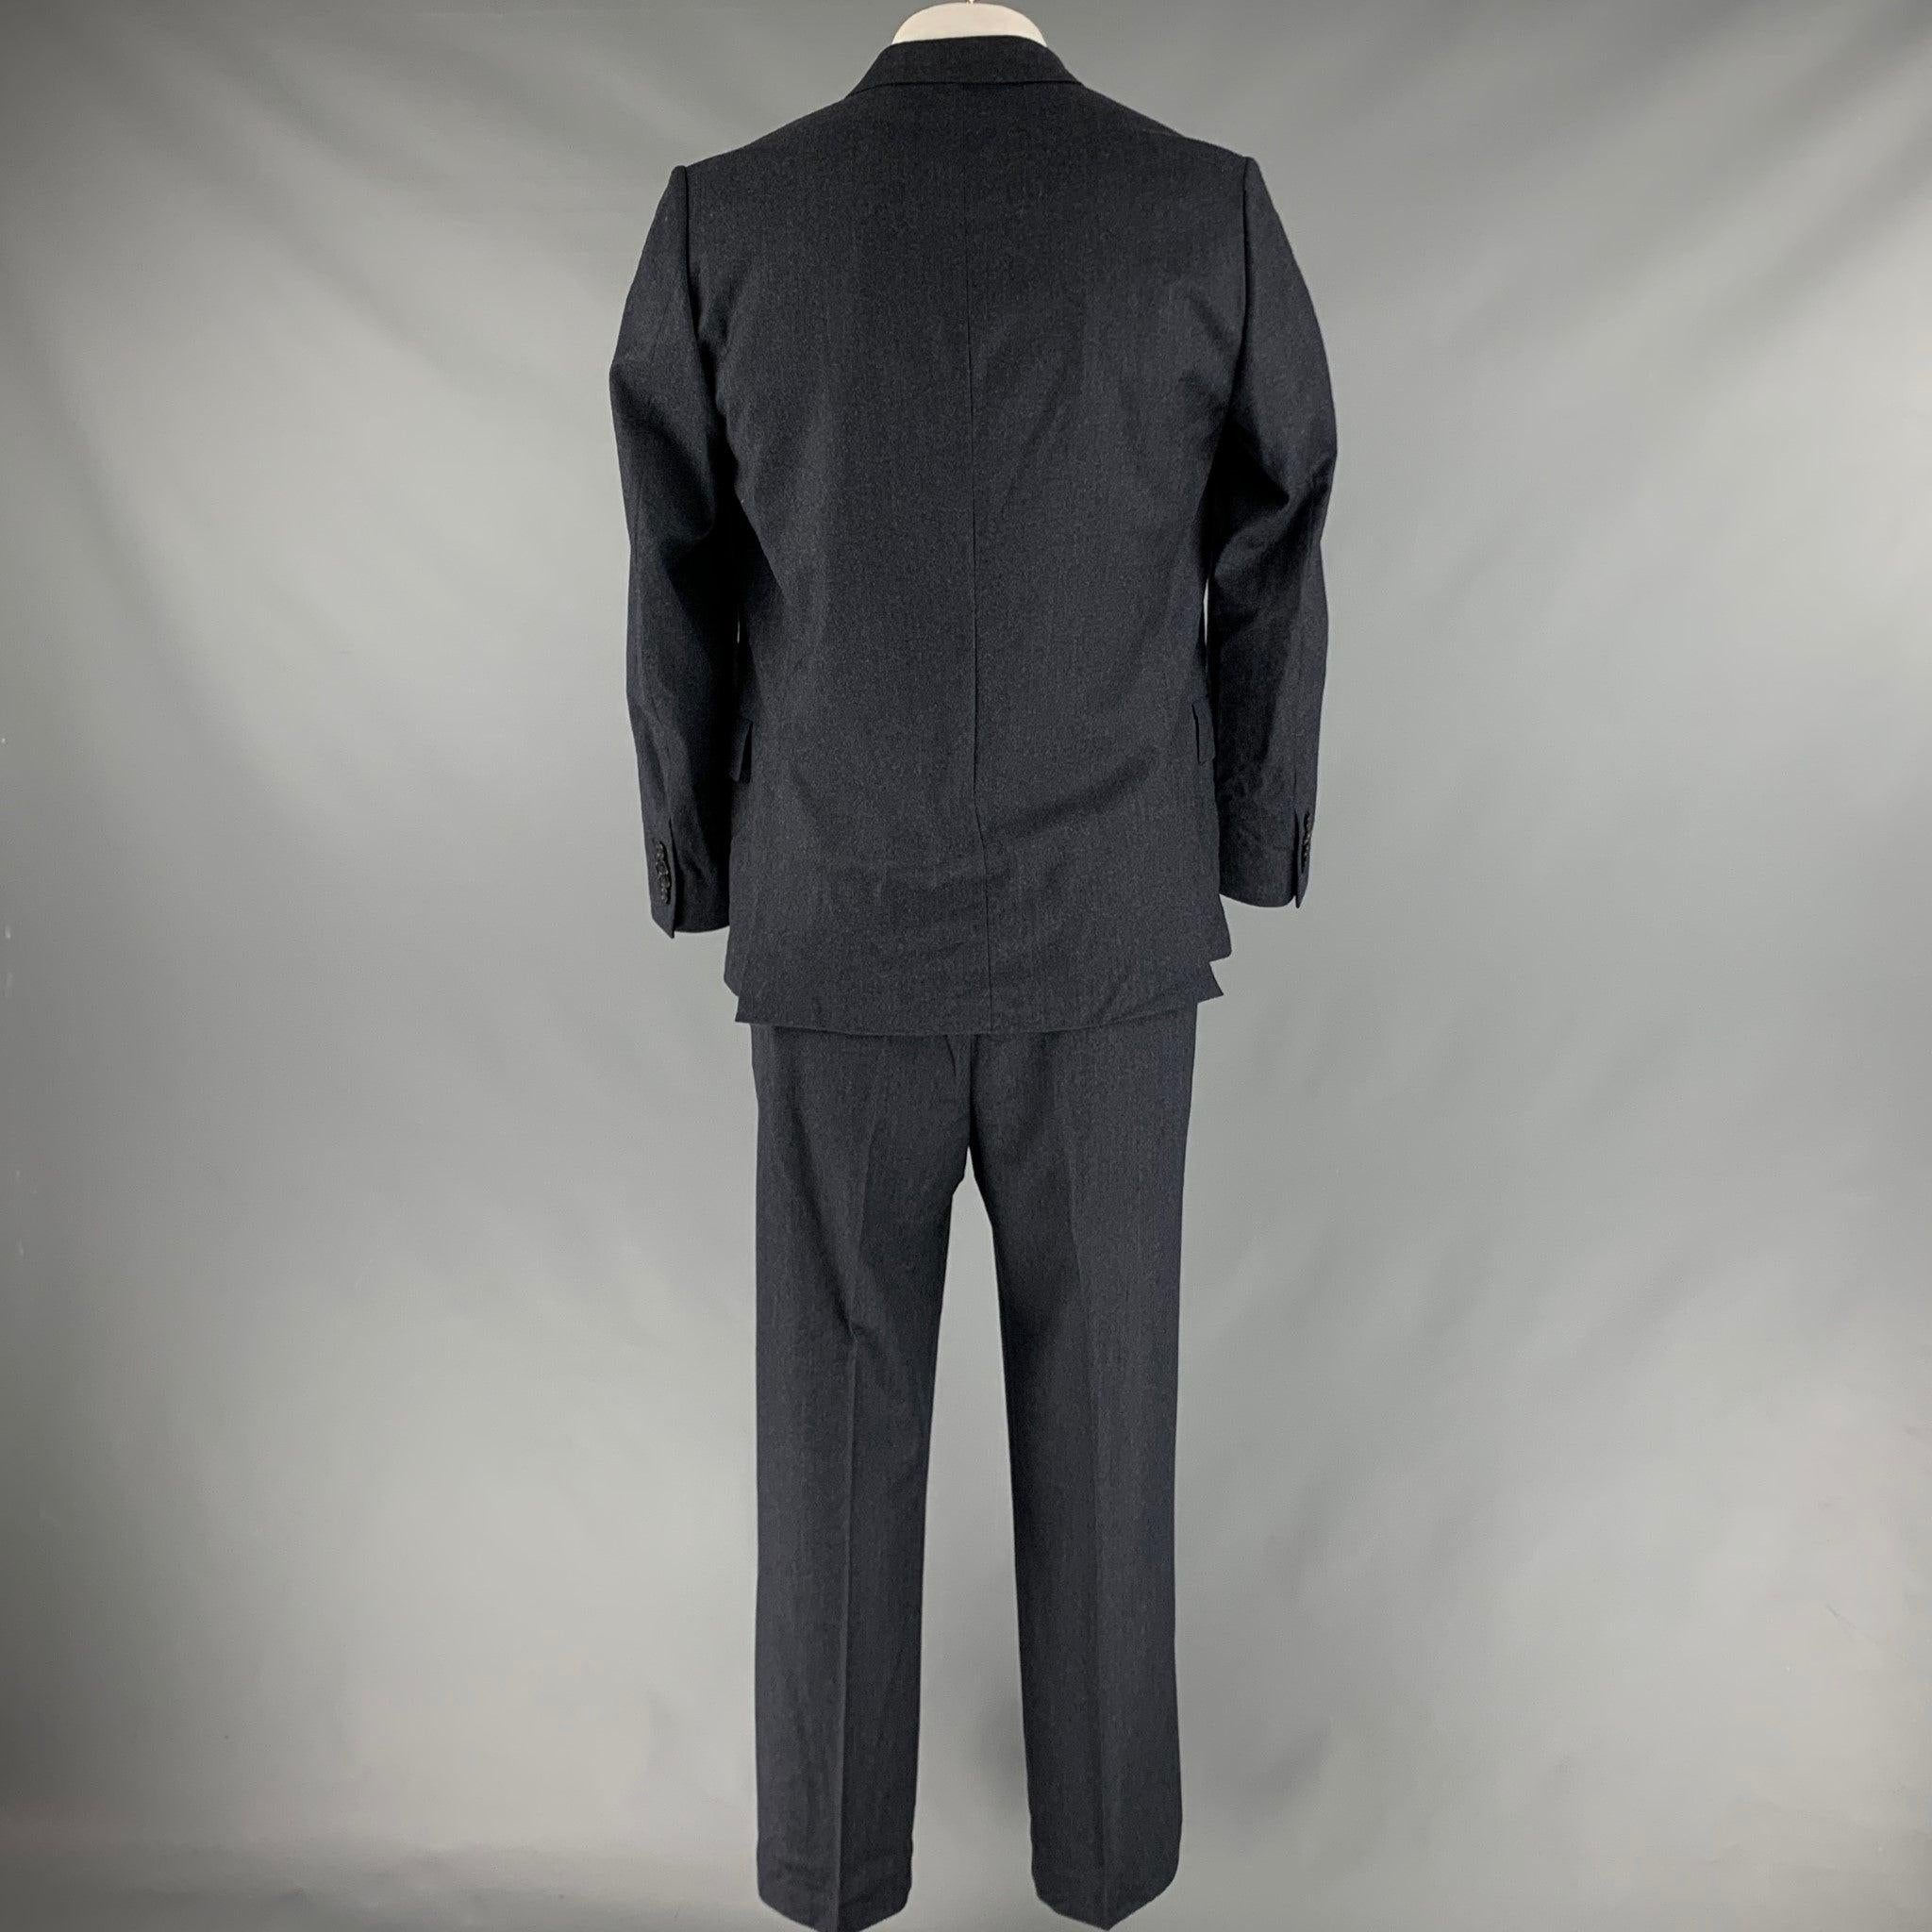 PAUL SMITH Size 42 Navy Wool Silk Notch Lapel Suit In Good Condition For Sale In San Francisco, CA